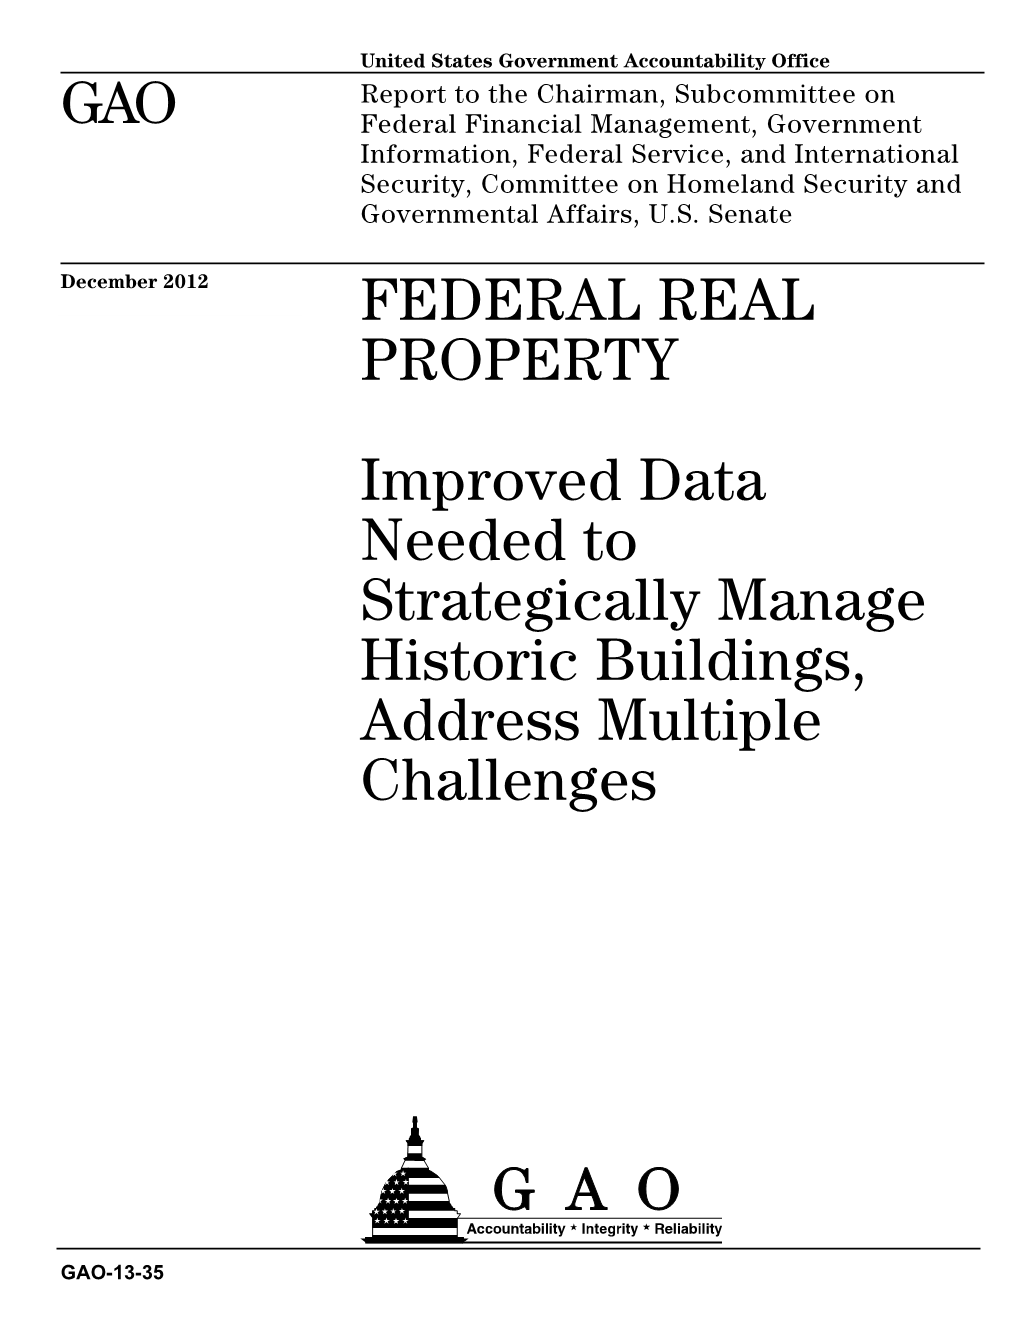 Gao-13-35, Federal Real Property